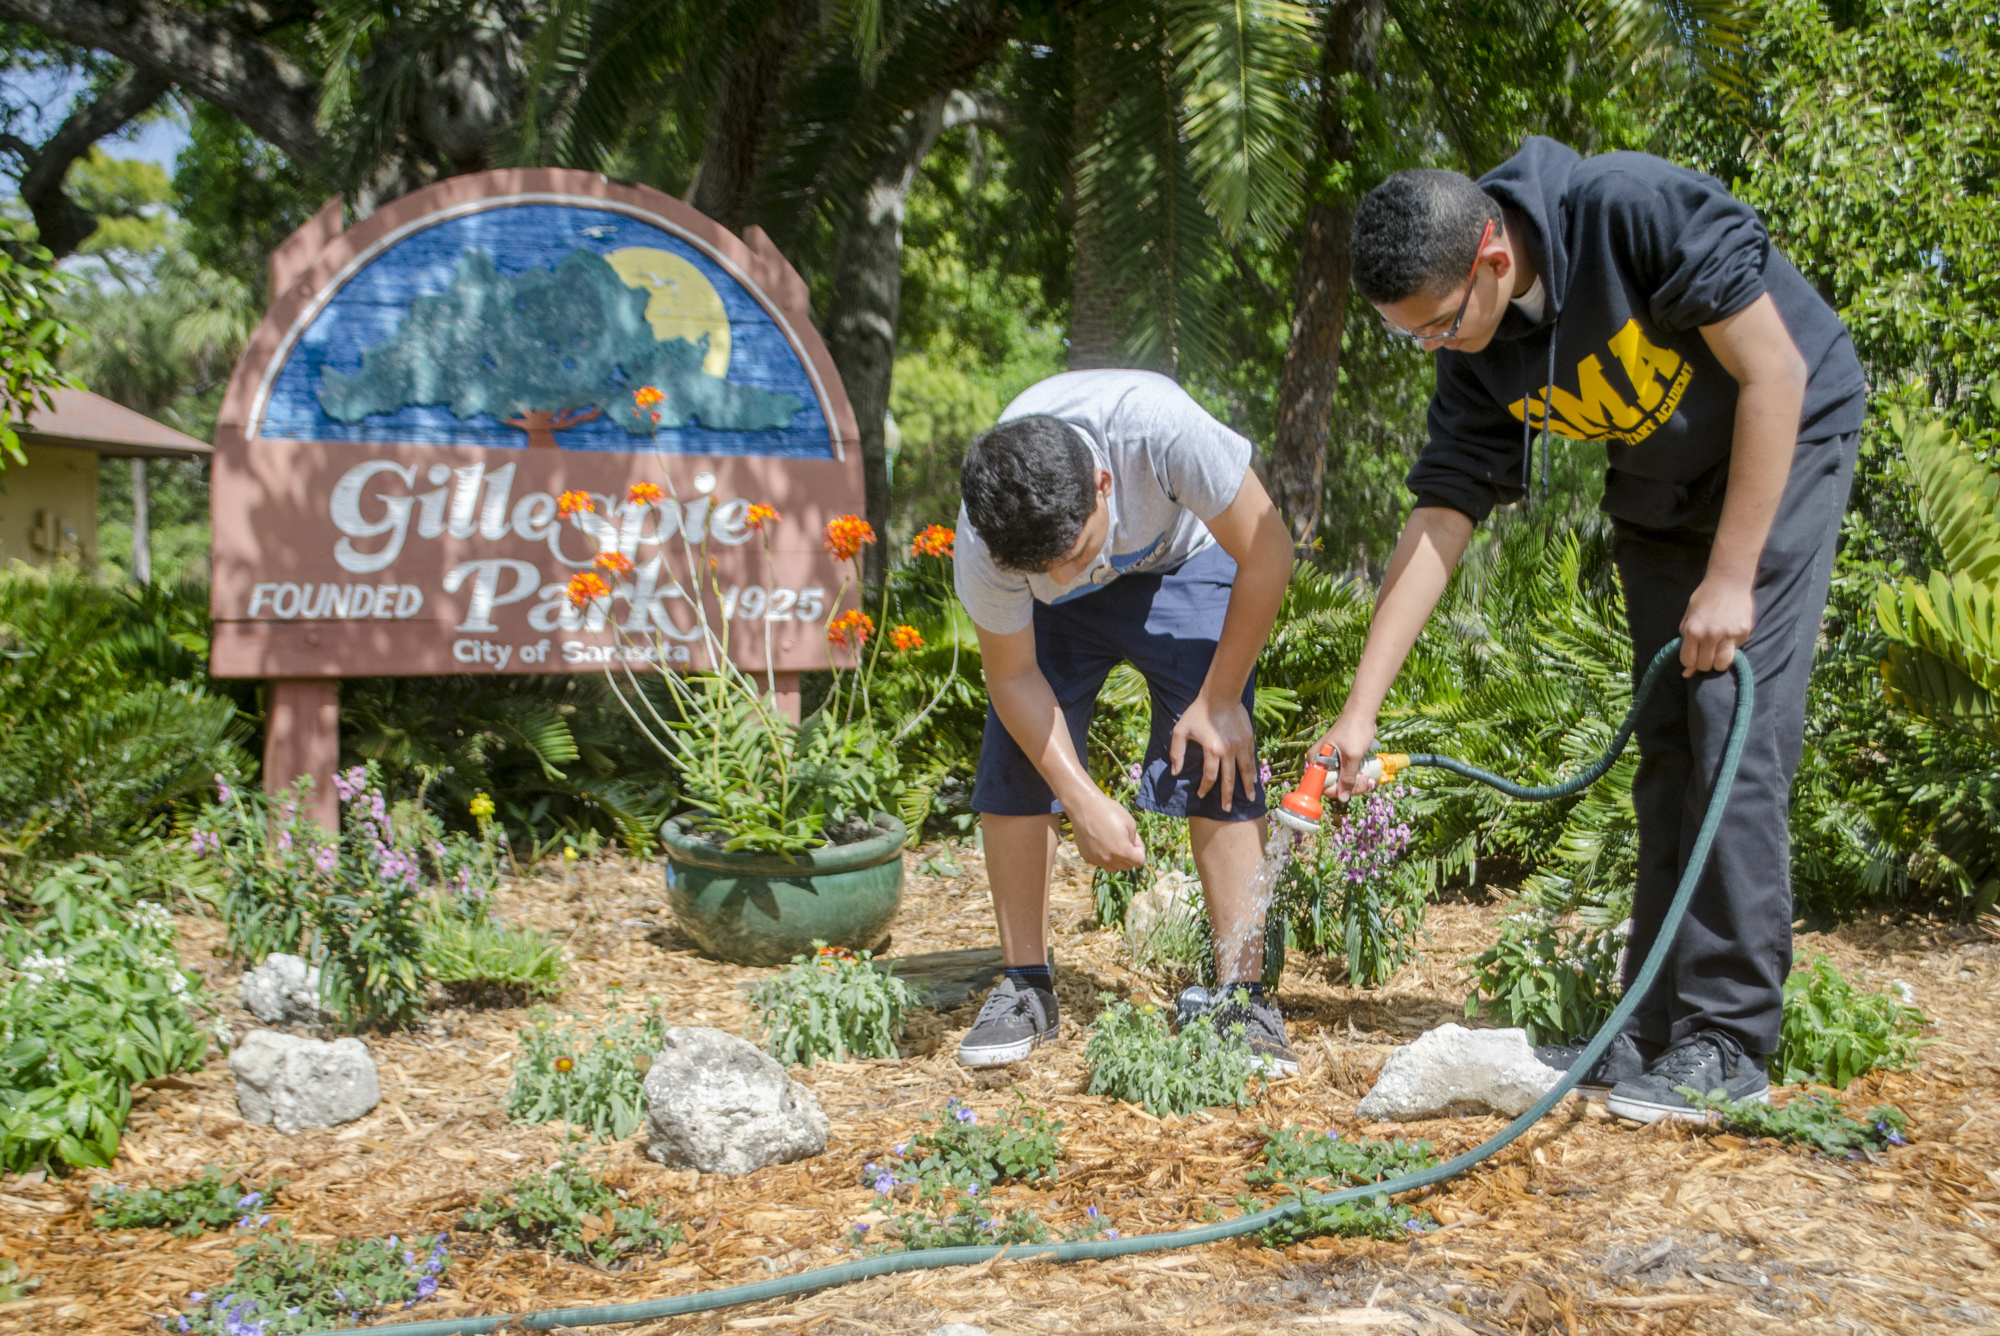 Diego Leon and Quinn Selby Gomez water flowers in front of the Gillespie Park sign. 